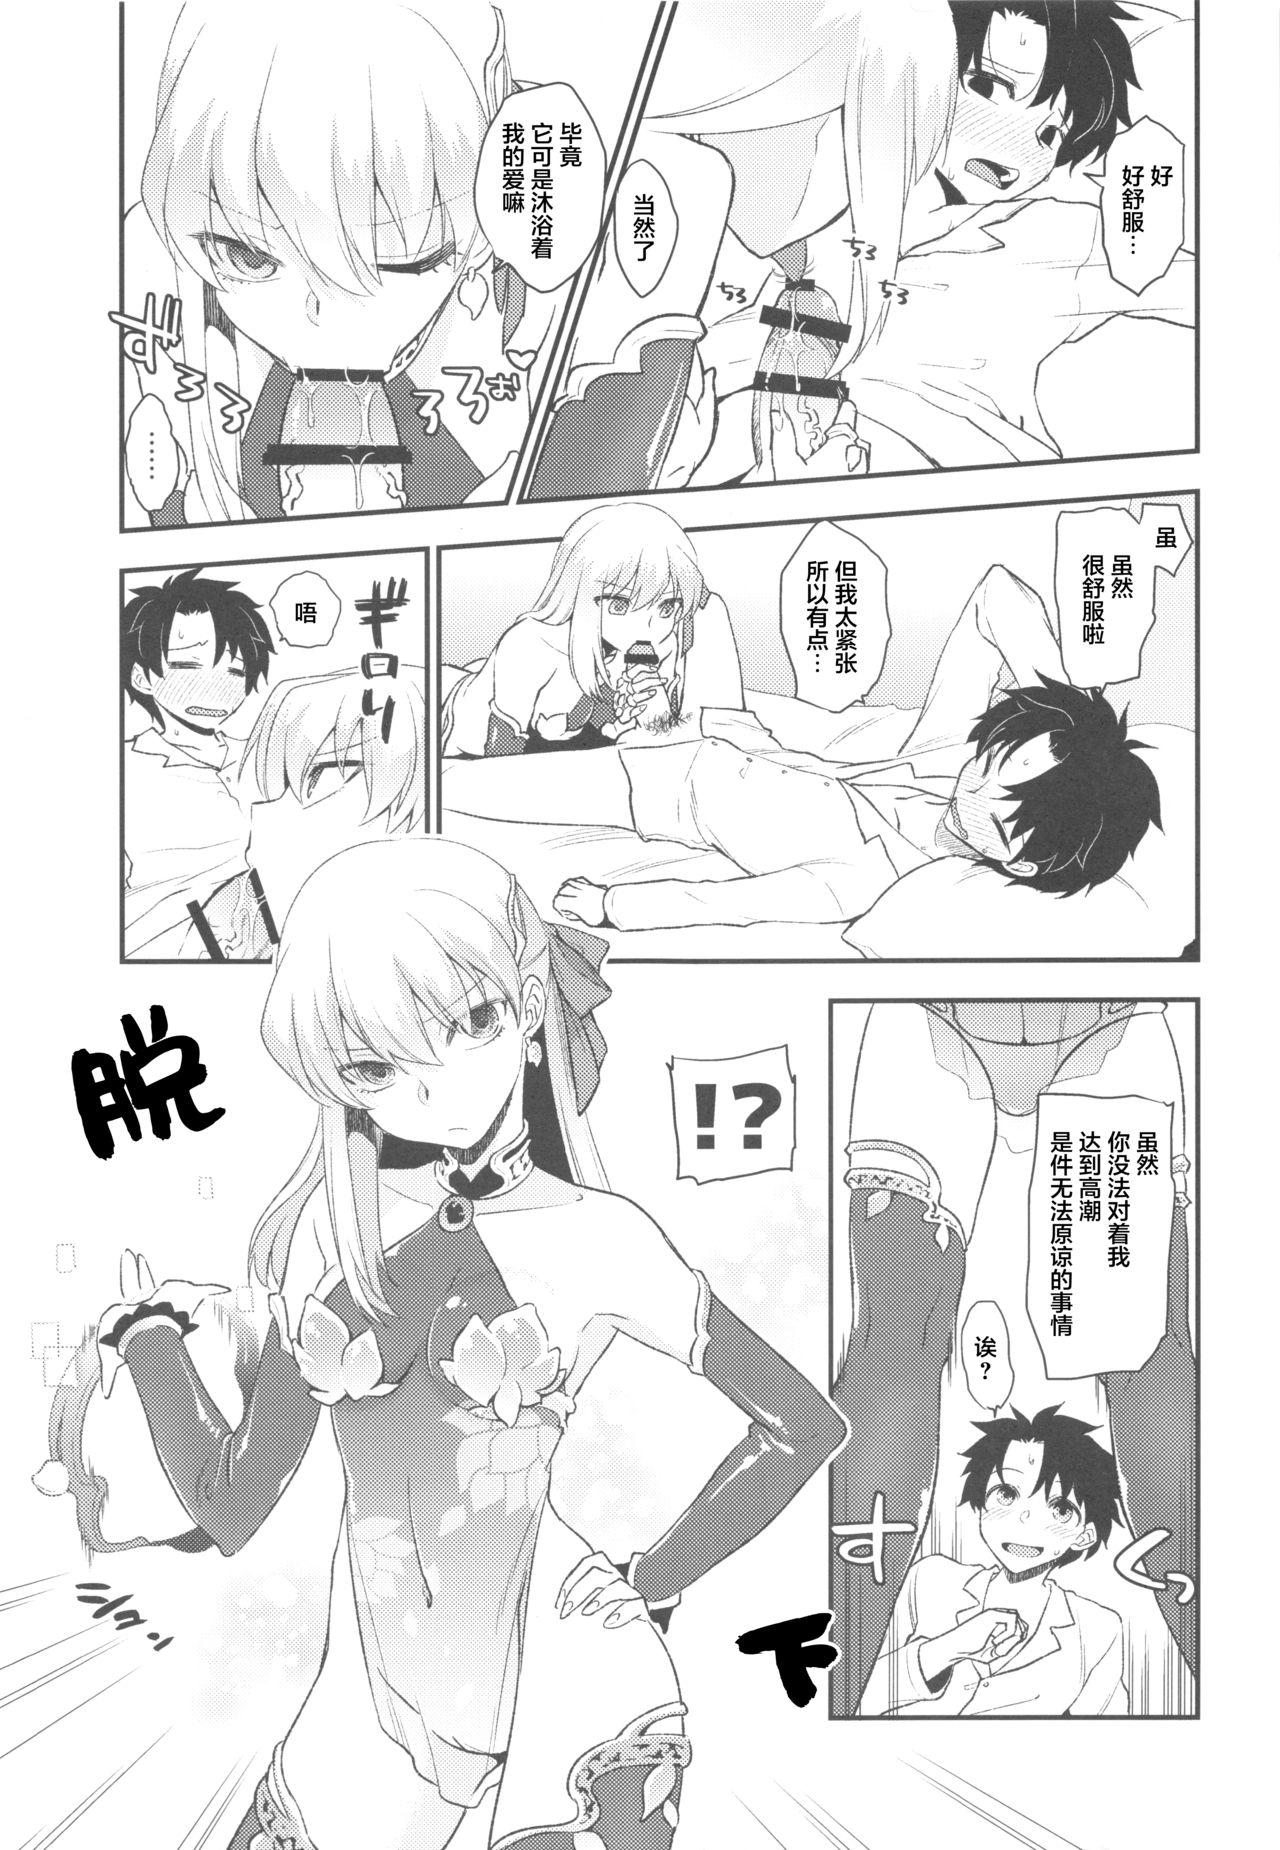 Married Shringarayoni - Fate grand order Hardcore Gay - Page 4